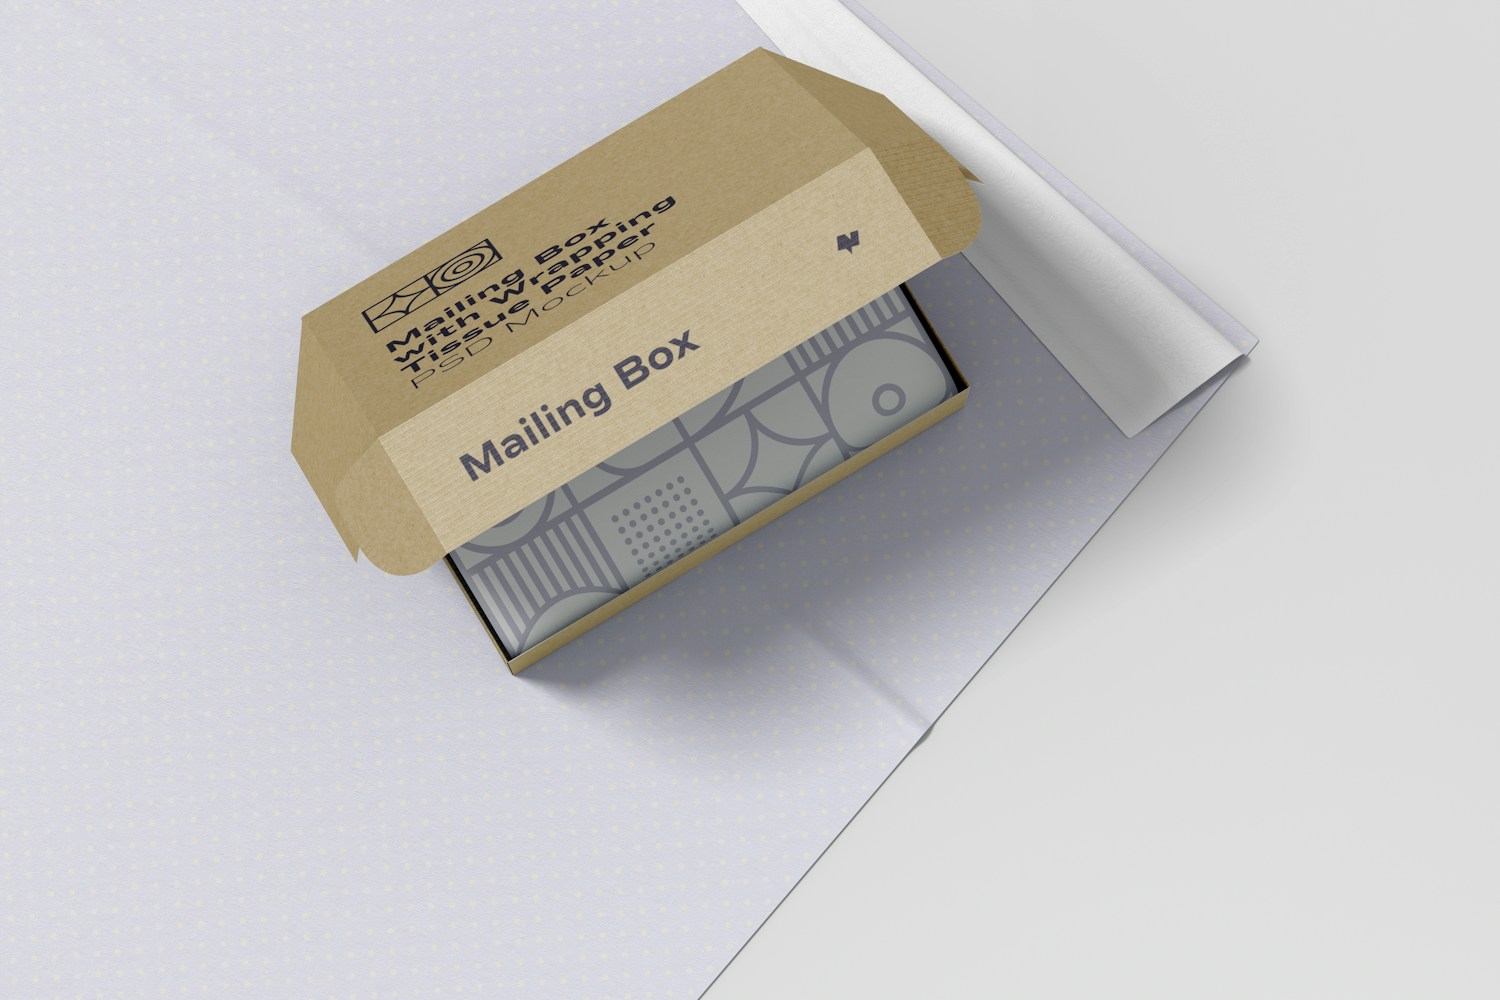 Mailing Box with Wrapping Tissue Paper Mockup, Top View